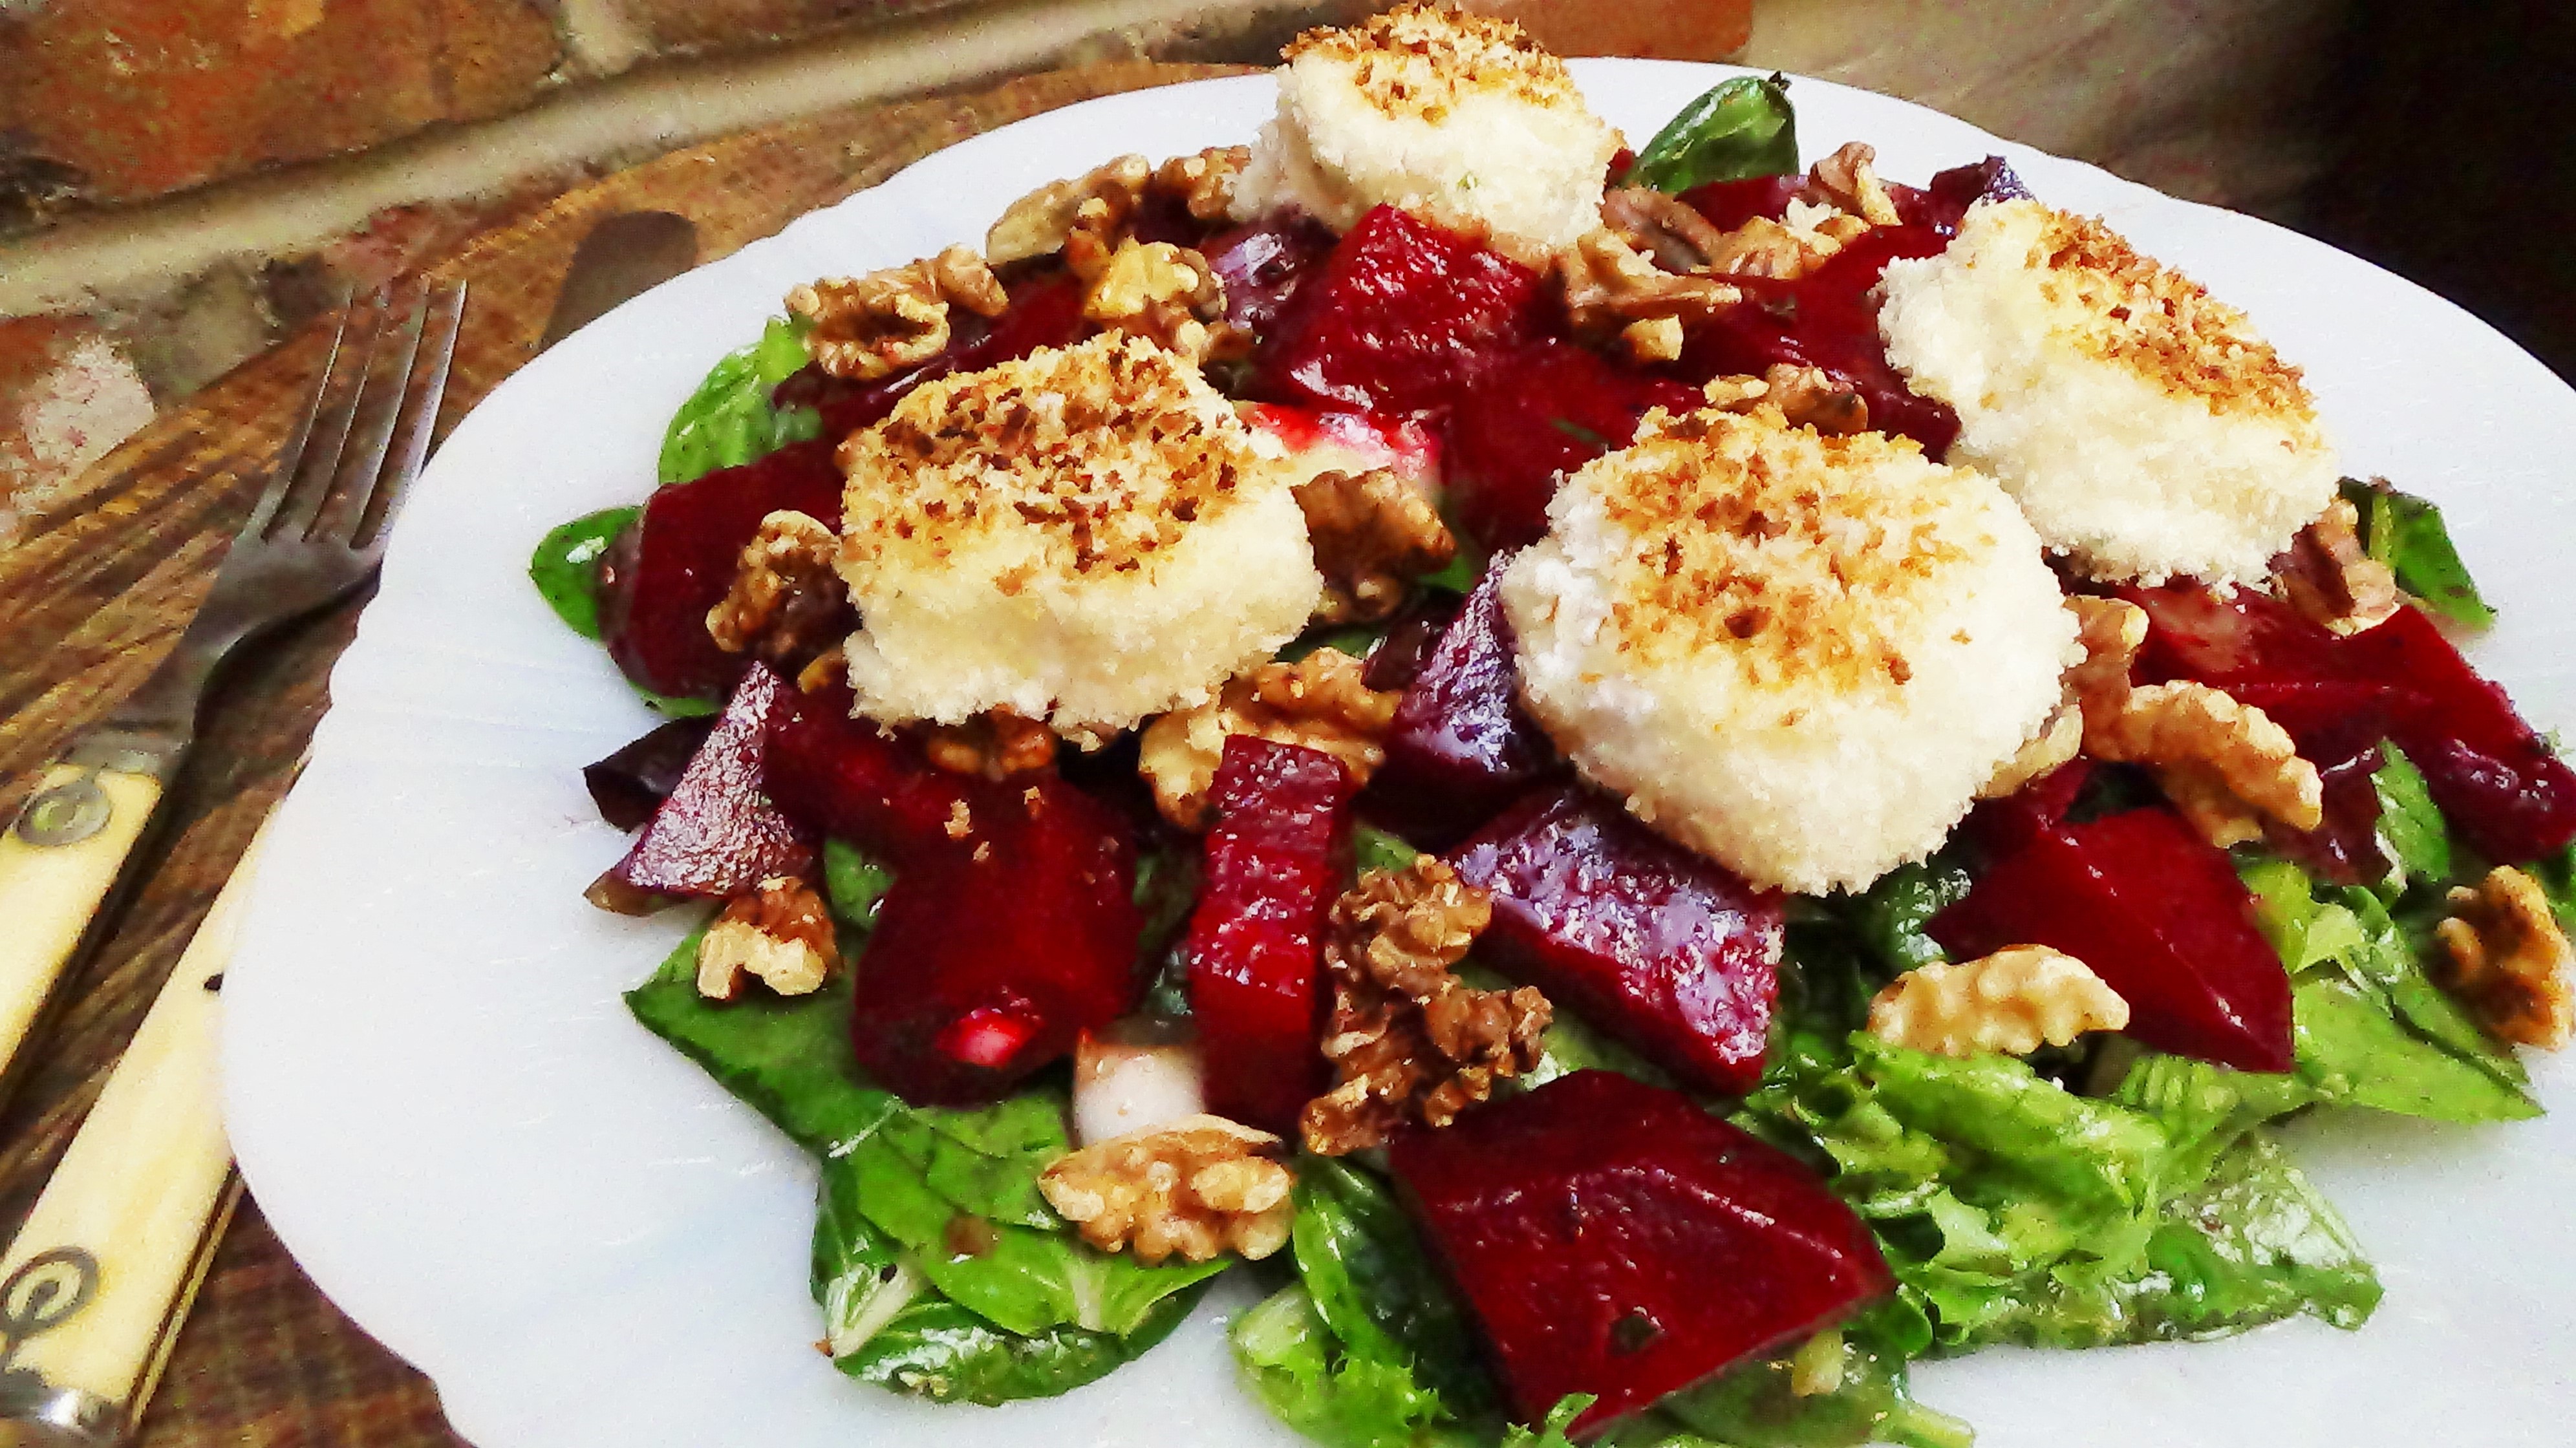 Roasted Beet Salad with Warm Goat Cheese